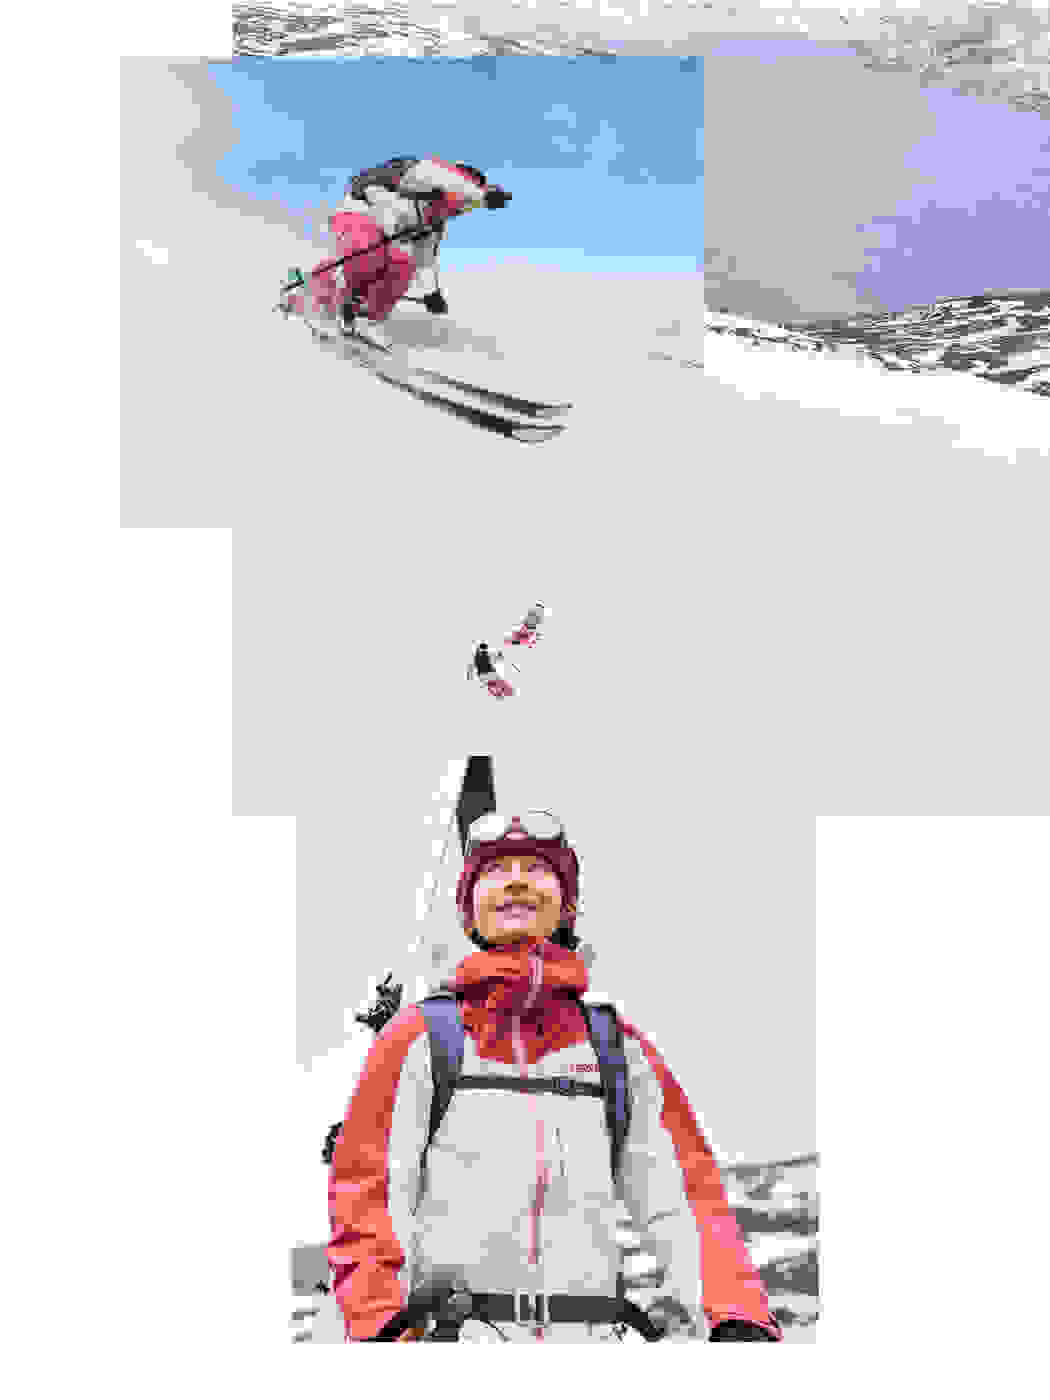 Image of Caja Schöpf, Professional Skier in new adidas TERREX product.